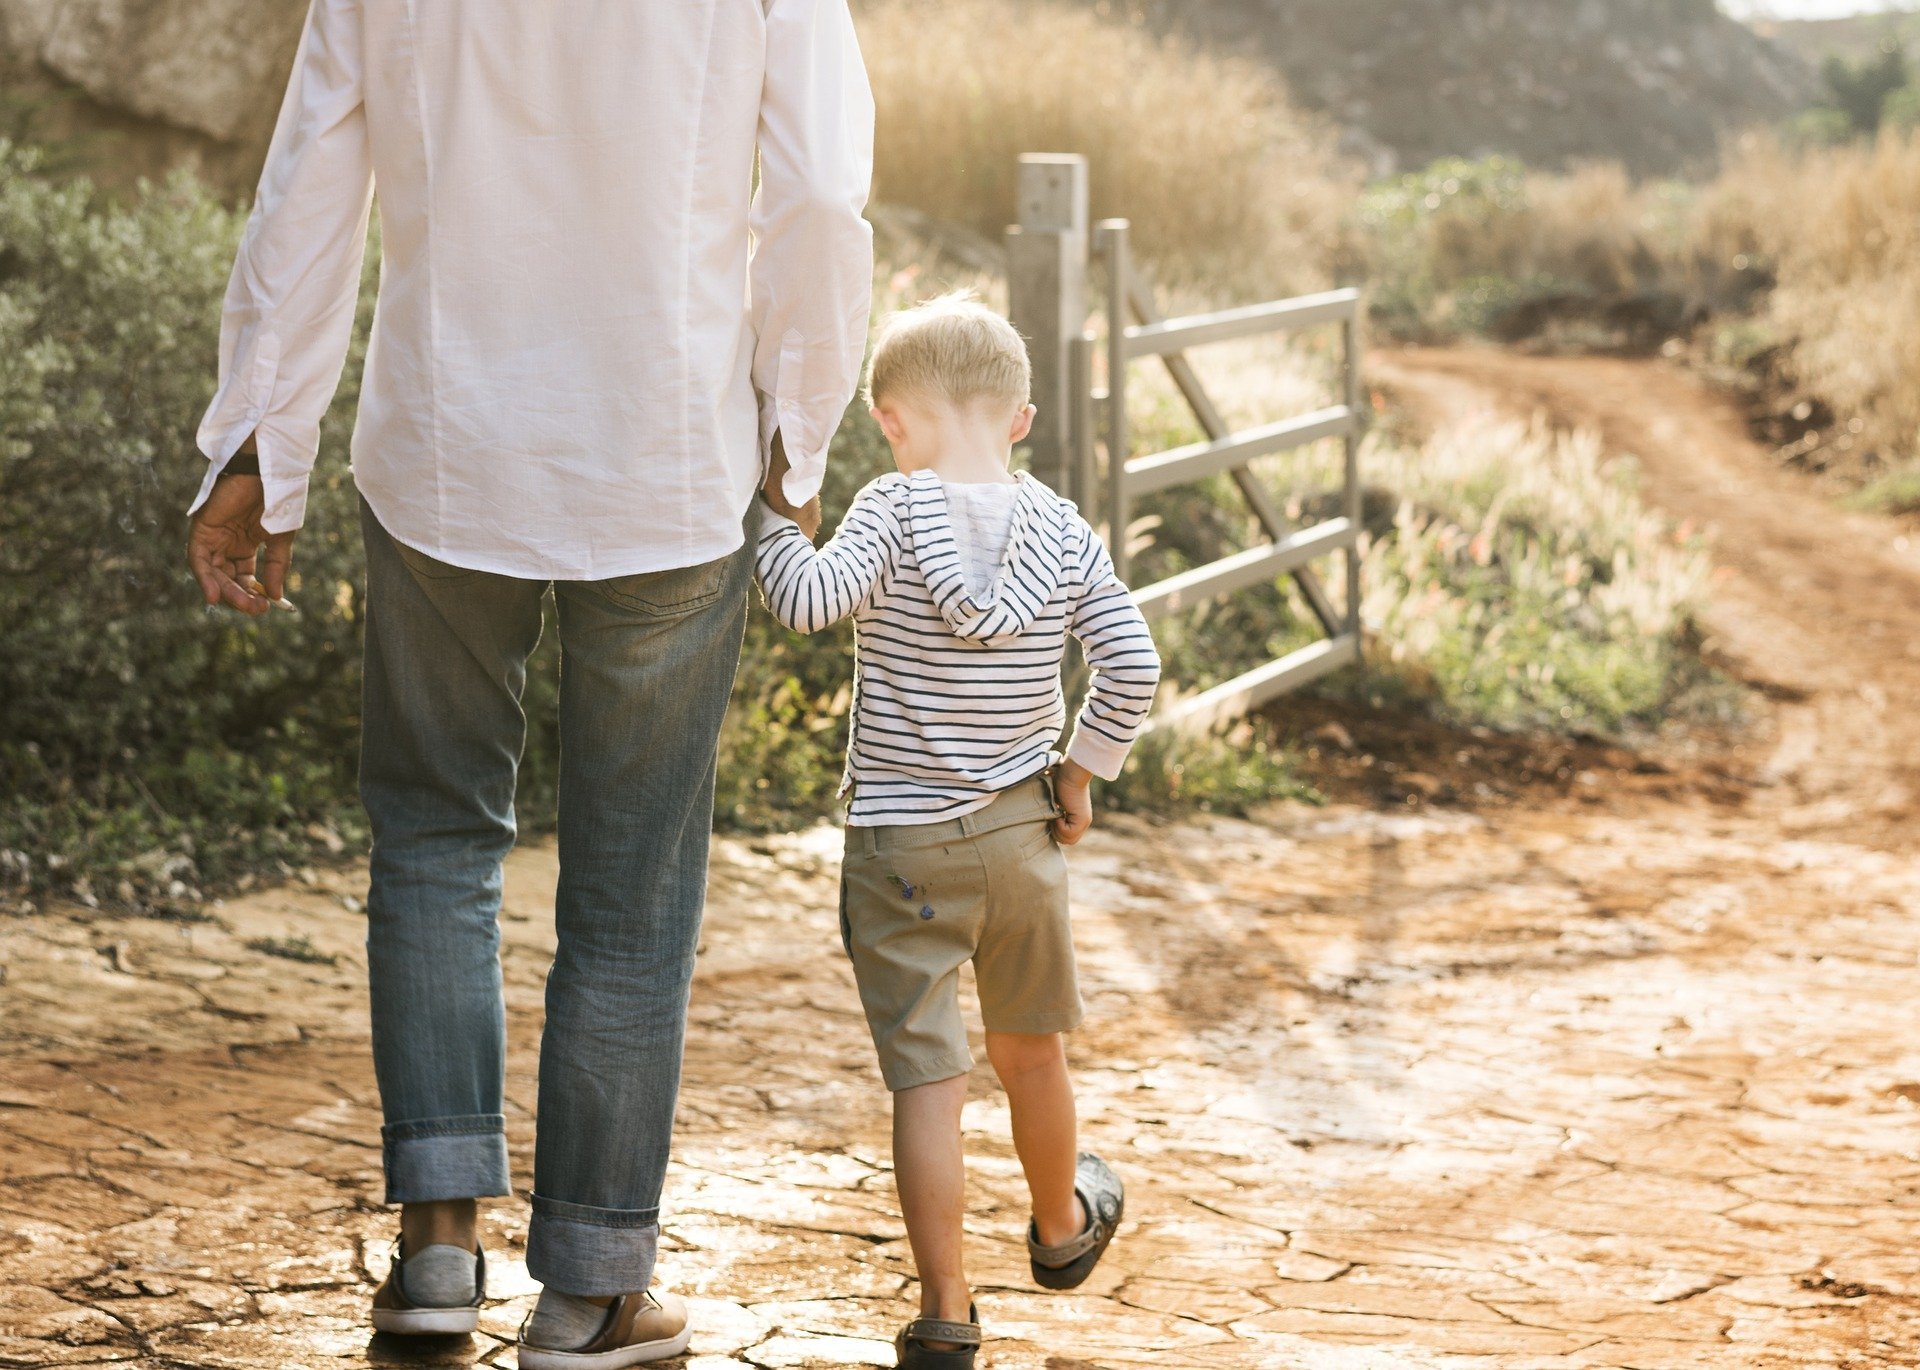 Father and son walking on a ranch. | Source: Pixabay